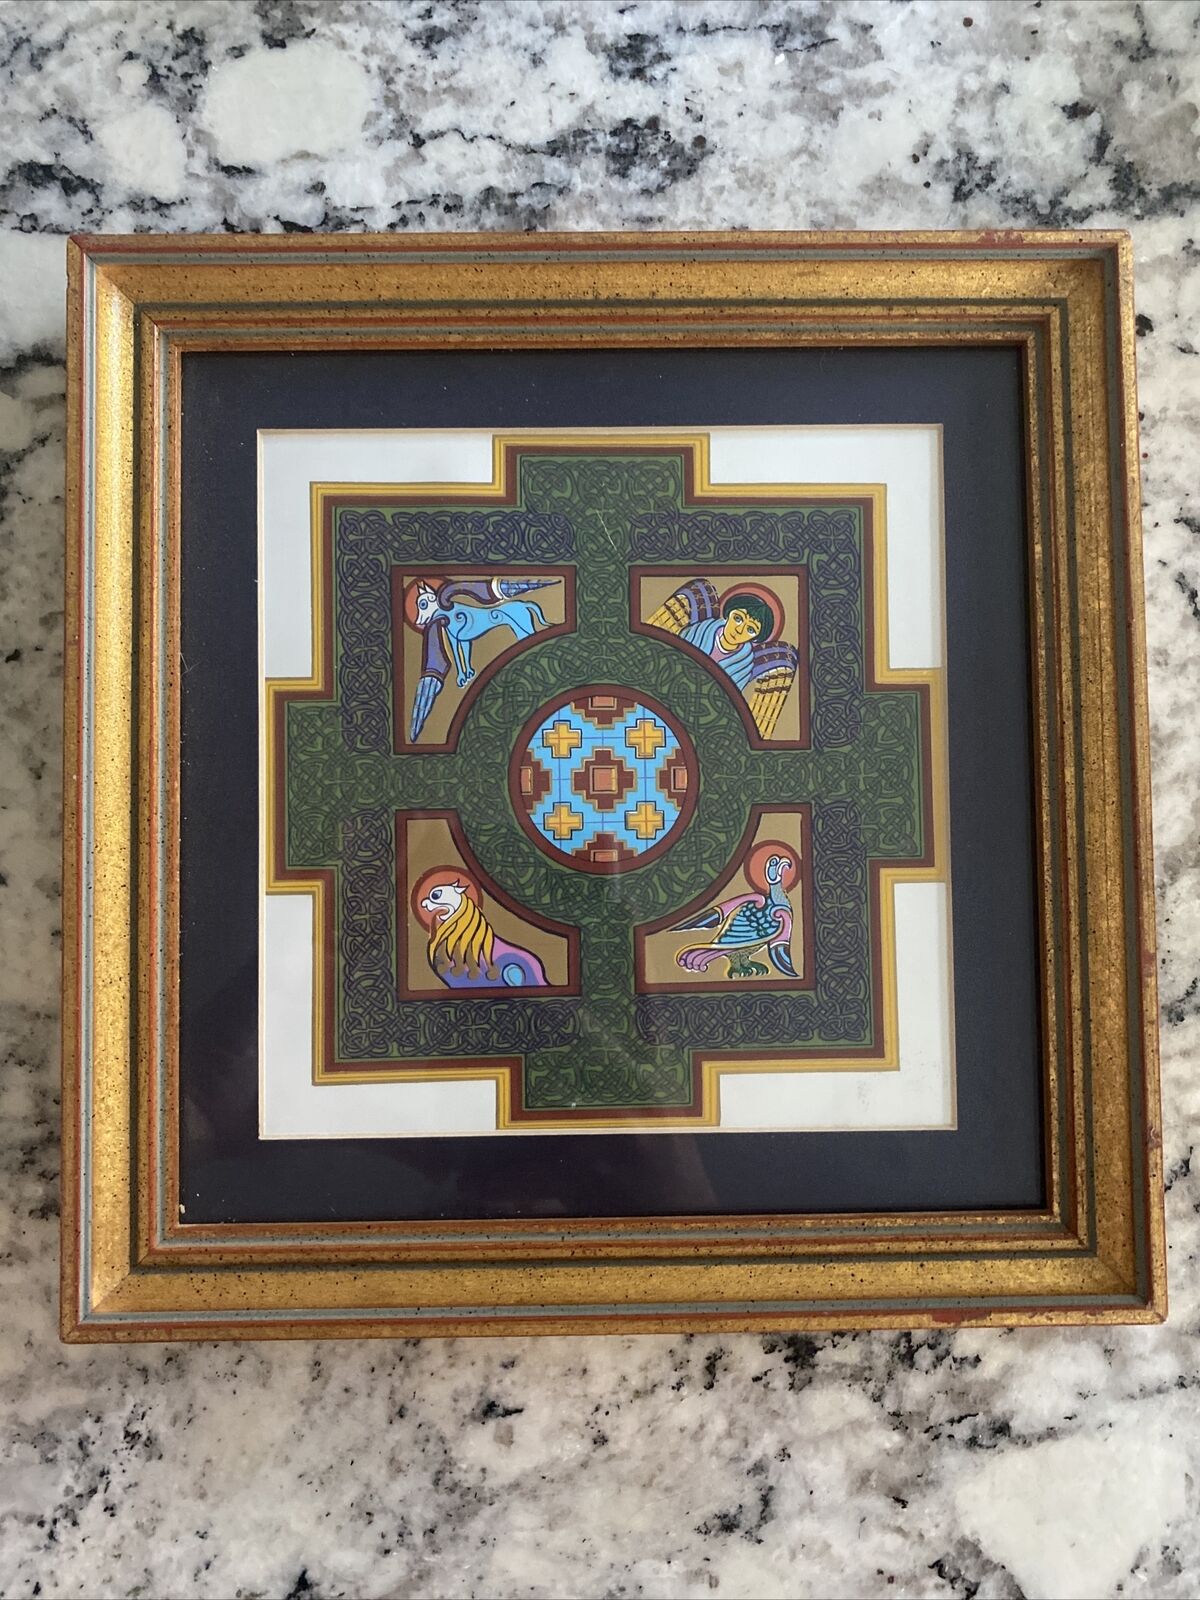 Tantra Designs KS6 Lindisfarne Celtic Cross With Four Mythical Beasts Framed Pic